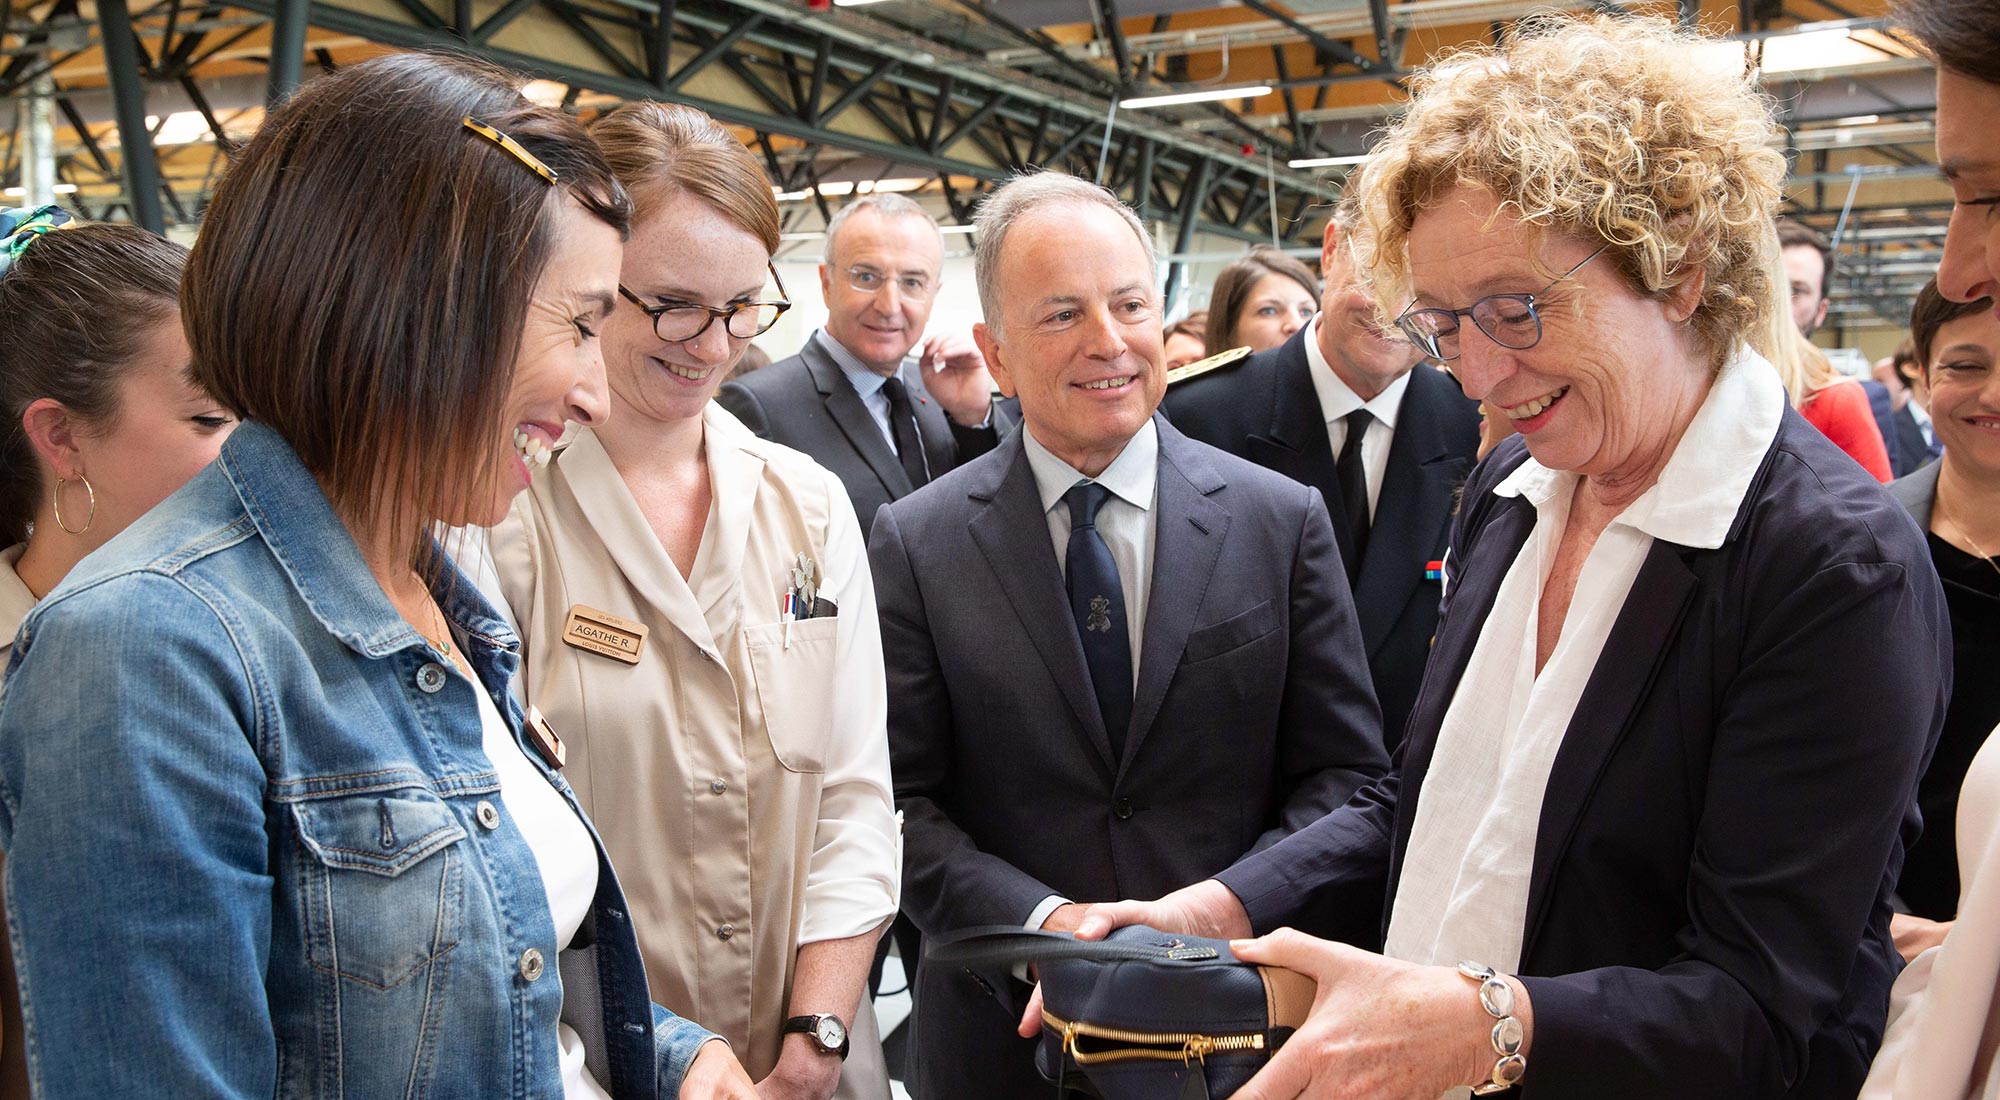 Louis Vuitton's New Atelier In France Sets Industry Standard